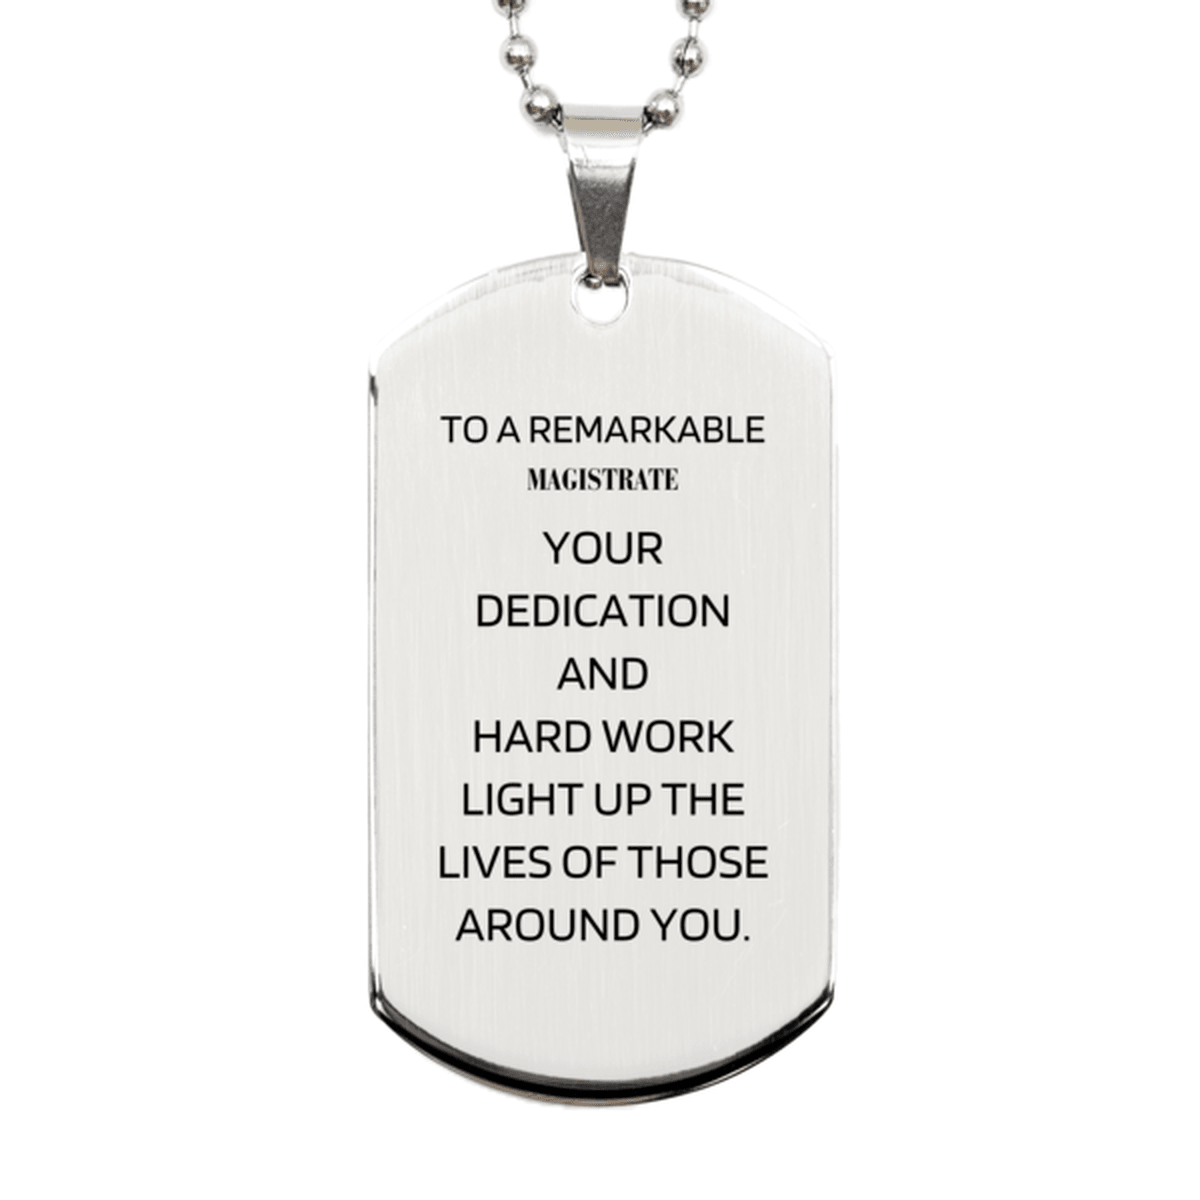 Remarkable Magistrate Gifts, Your dedication and hard work, Inspirational Birthday Christmas Unique Silver Dog Tag For Magistrate, Coworkers, Men, Women, Friends - Mallard Moon Gift Shop